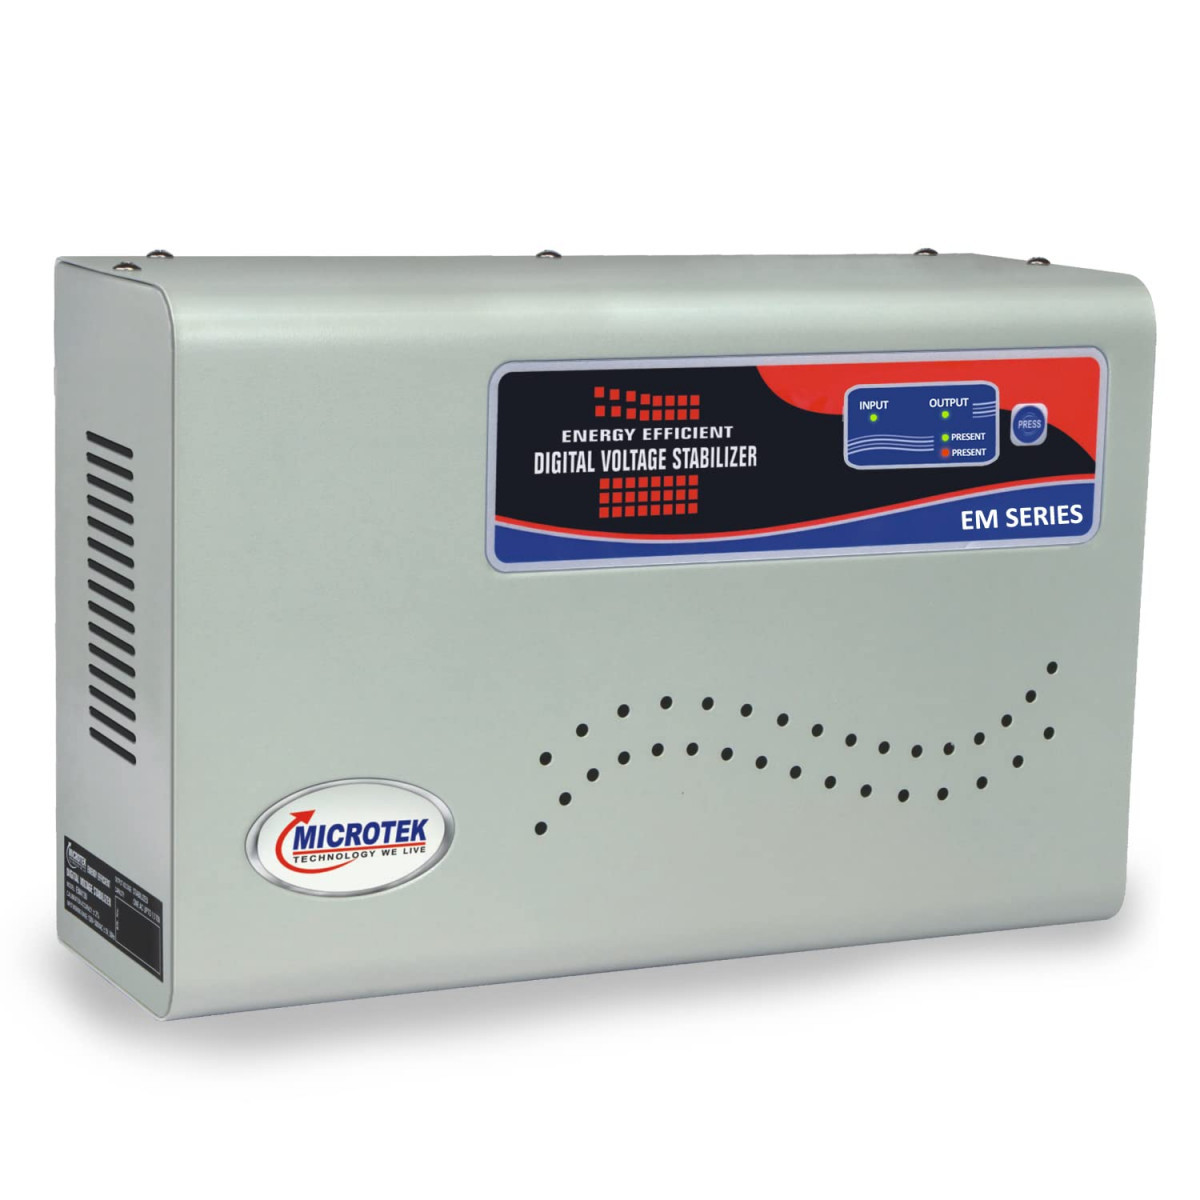 Microtek Pearl EM 5170 Automatic Air Conditioners AC Voltage Stabilizer Upto 20 Ton Working Power 170V-270VMetalic Grey with 3 Year Warranty